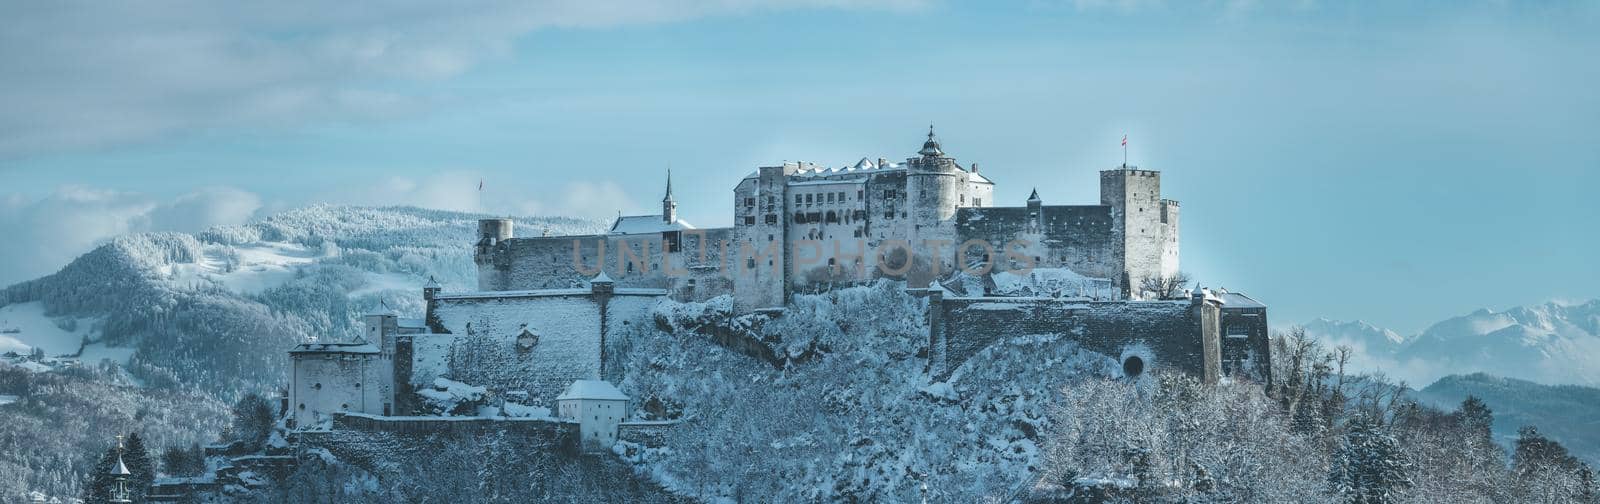 Fortress Hohensalzburg in the Winter, snowy